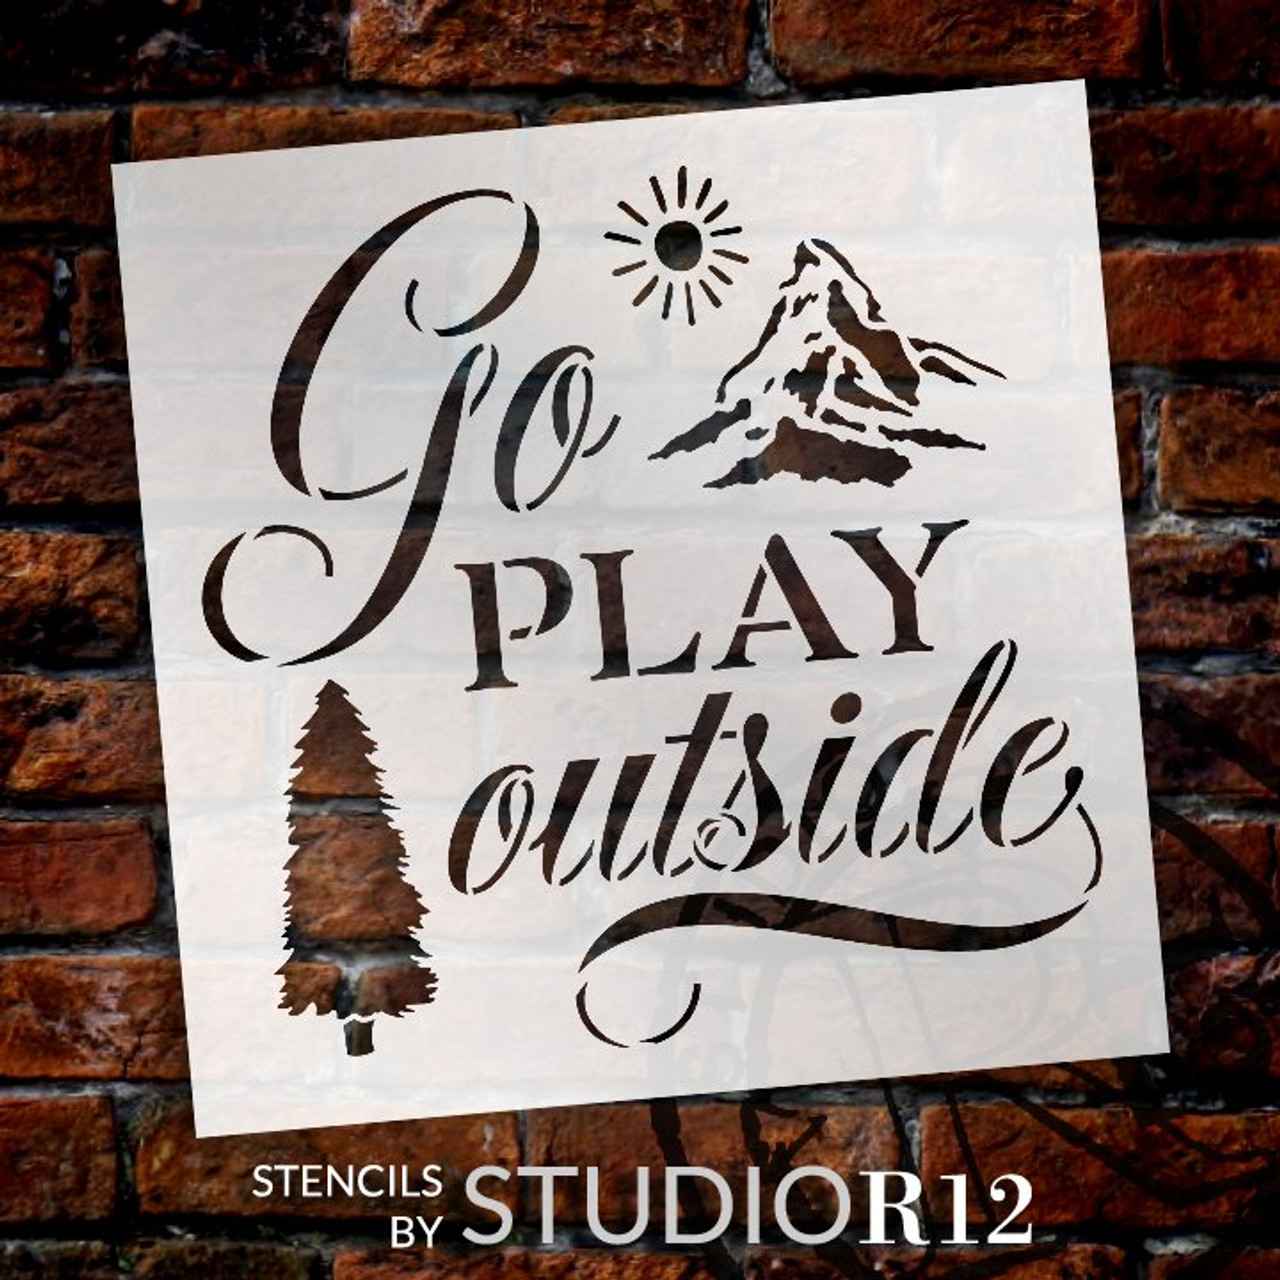 Go Play Outside Stencil with Mountain by StudioR12 | DIY Outdoor Cabin Home Decor | Craft & Paint Wood Signs for Summer | Select Size